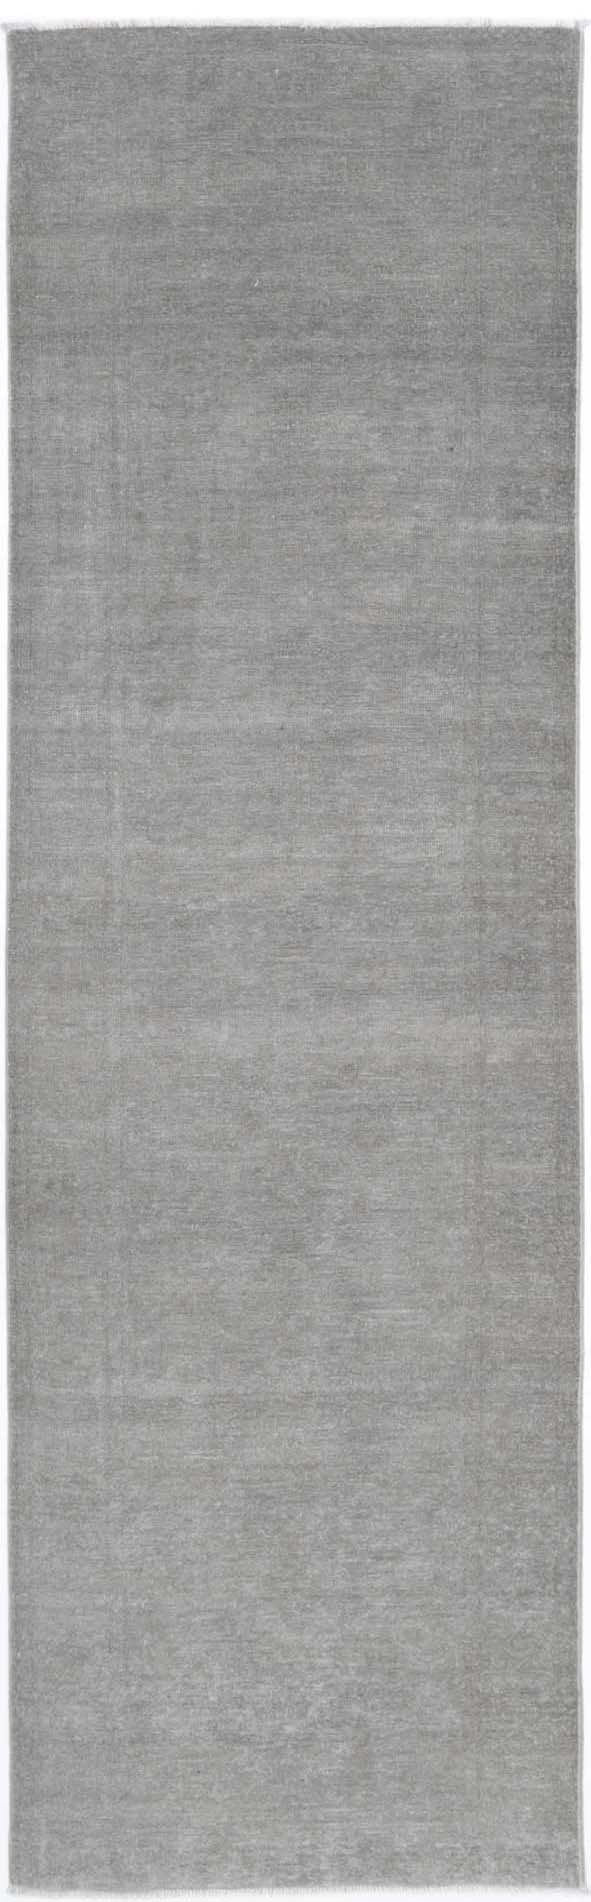 Hand Knotted Overdyed Wool Rug - 2'8'' x 9'3''